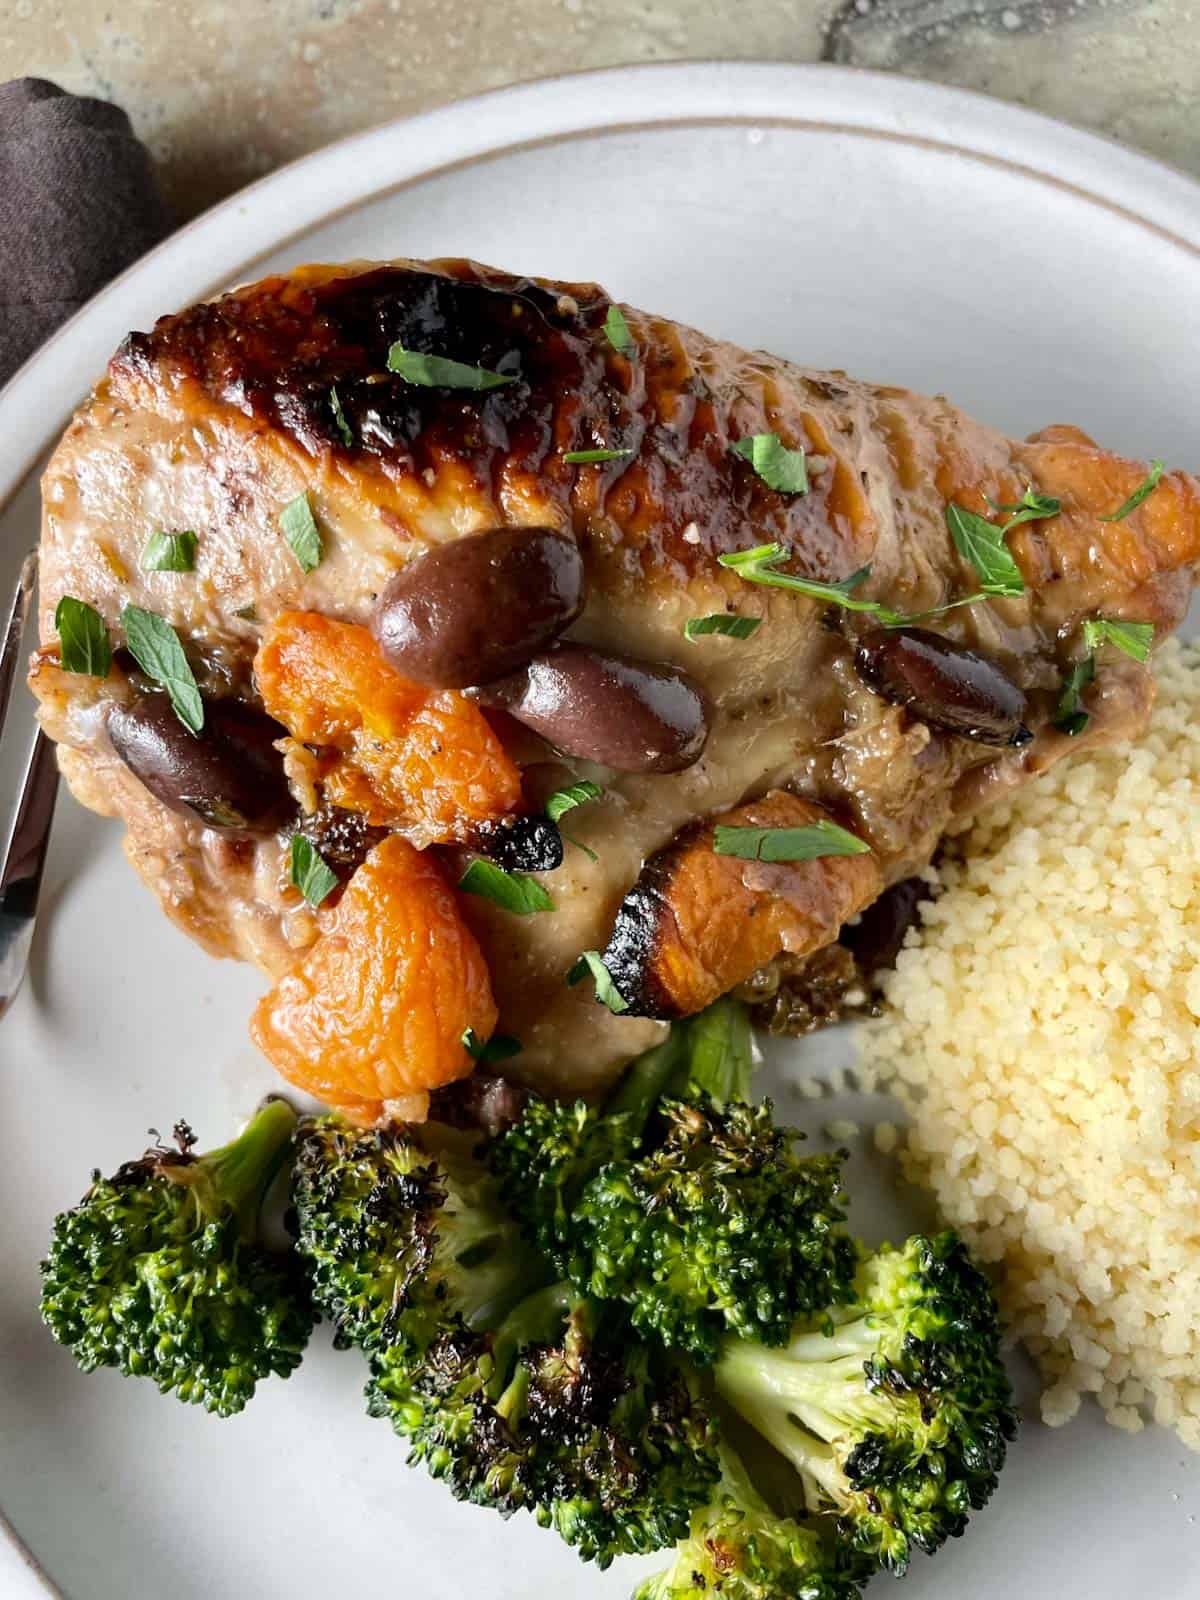 Chicken Marbella with apricots and olives served with quinoa and broccoli.